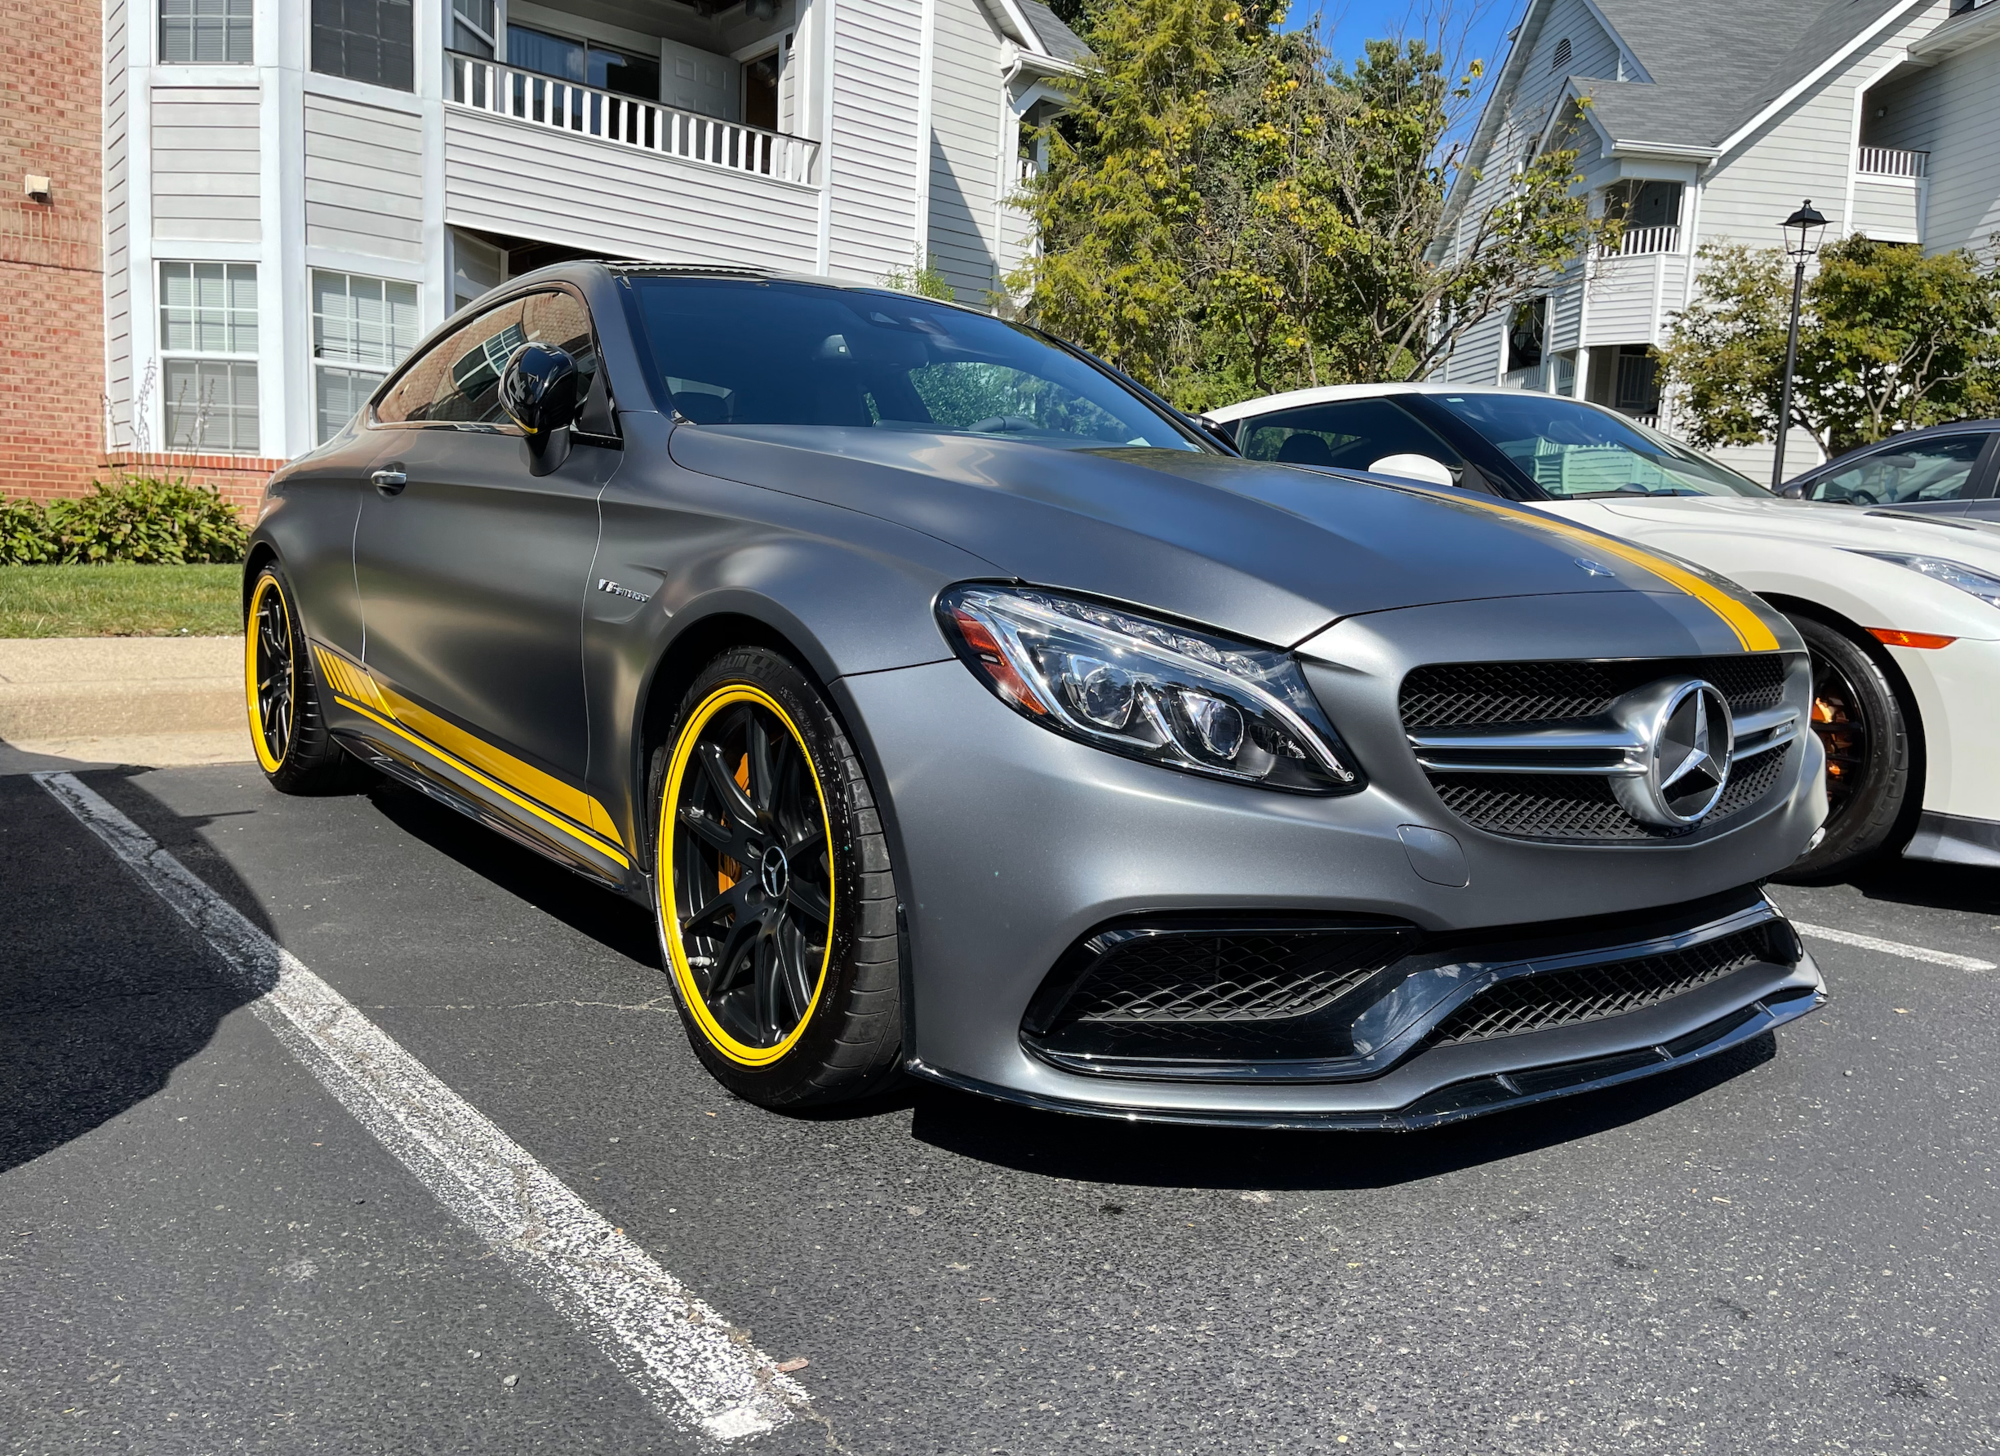 2017 Mercedes-Benz C63 AMG S - 2017 C63S AMG Coupe Edition 1 17k Miles Stock!! - Used - VIN WDDWJ8HB6HF439133 - 17,100 Miles - 8 cyl - 2WD - Automatic - Coupe - Gray - Springfield, VA 22150, United States